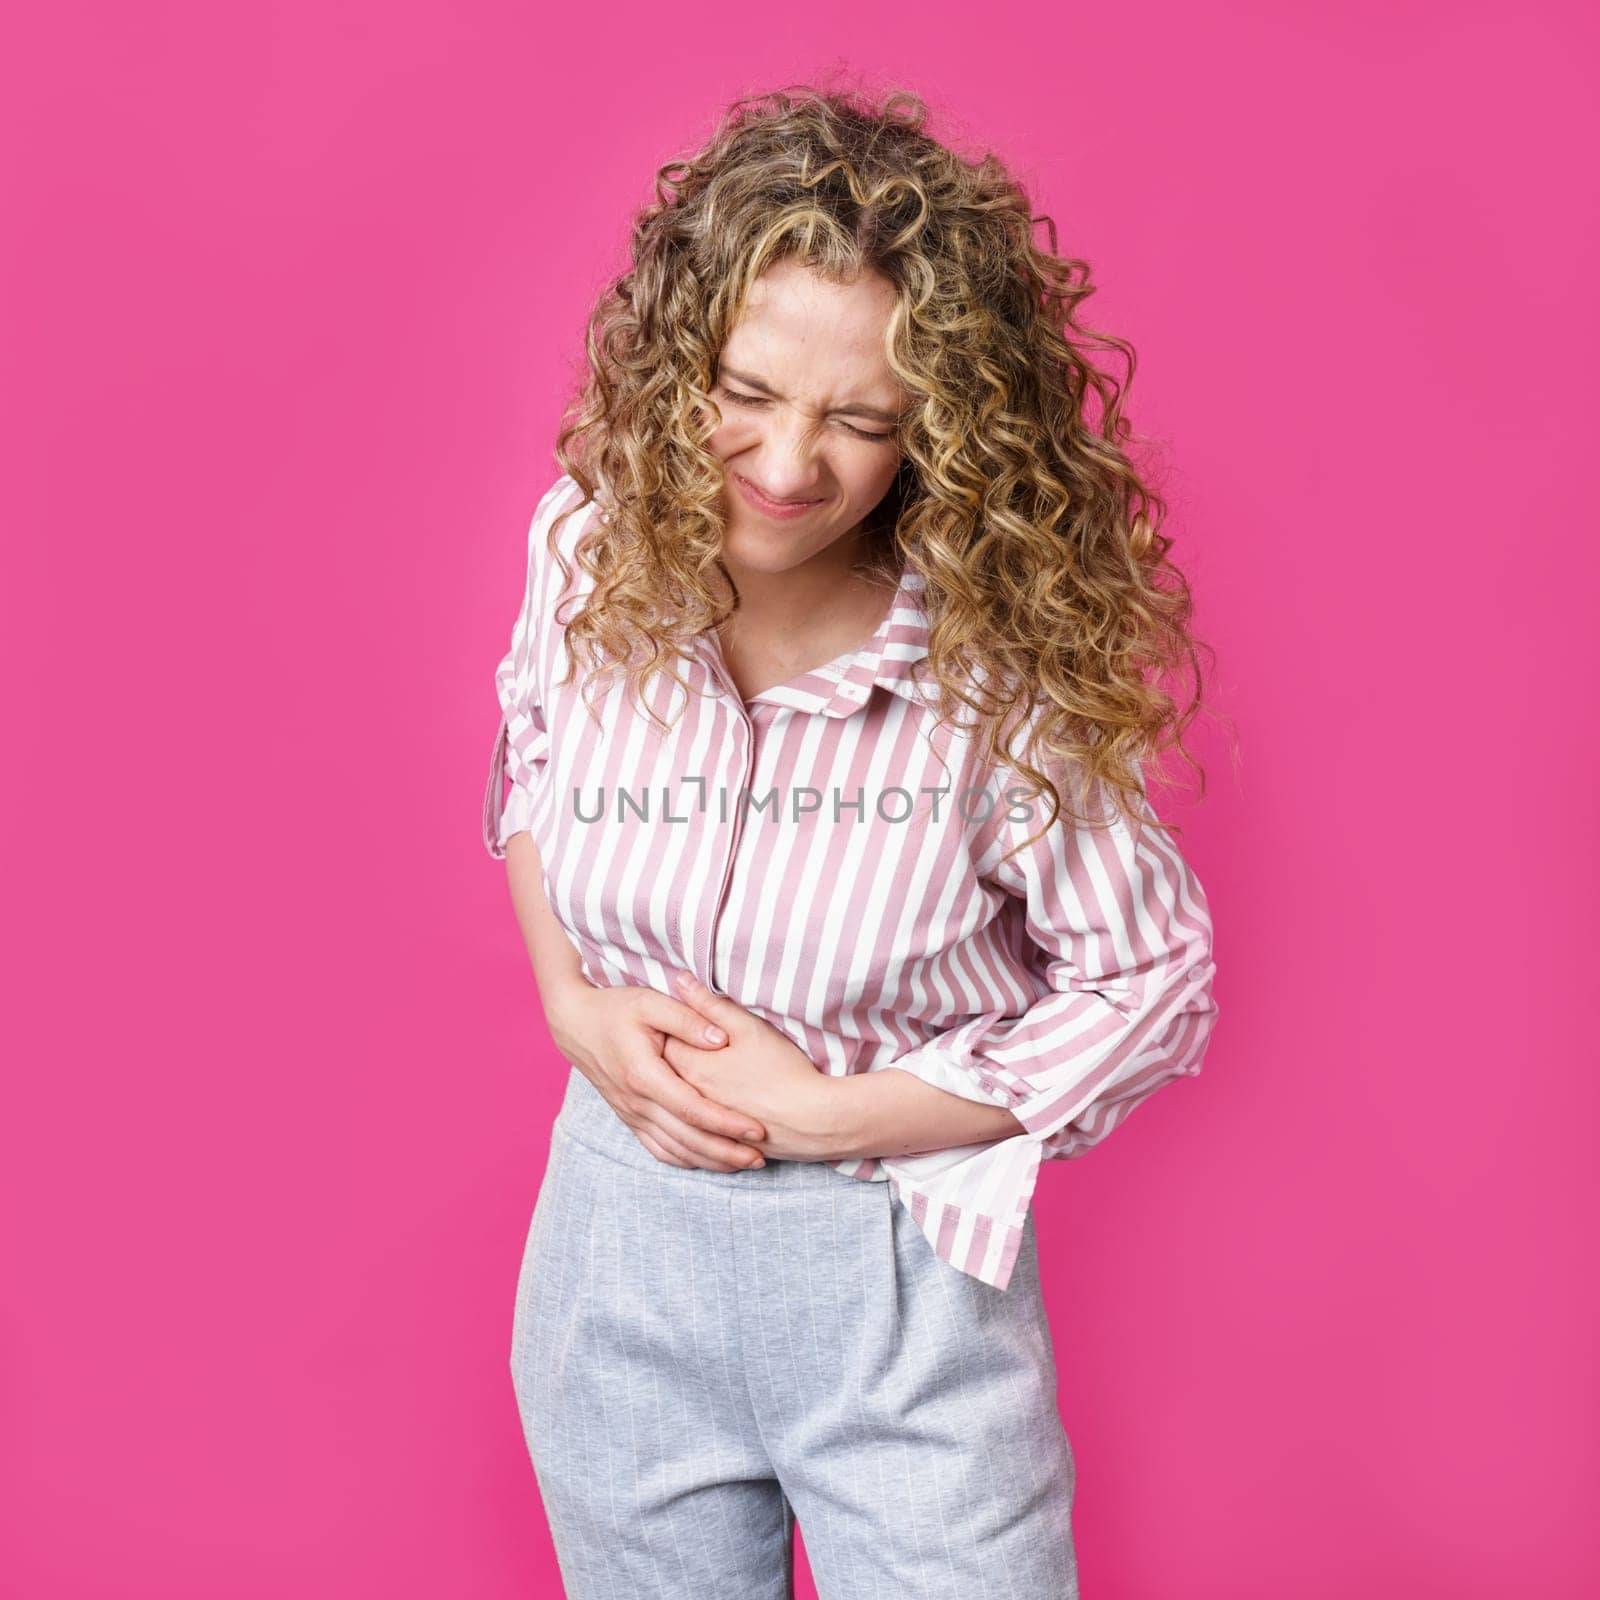 The young woman closed her eyes, laughing holding her belly. Isolated on pink background